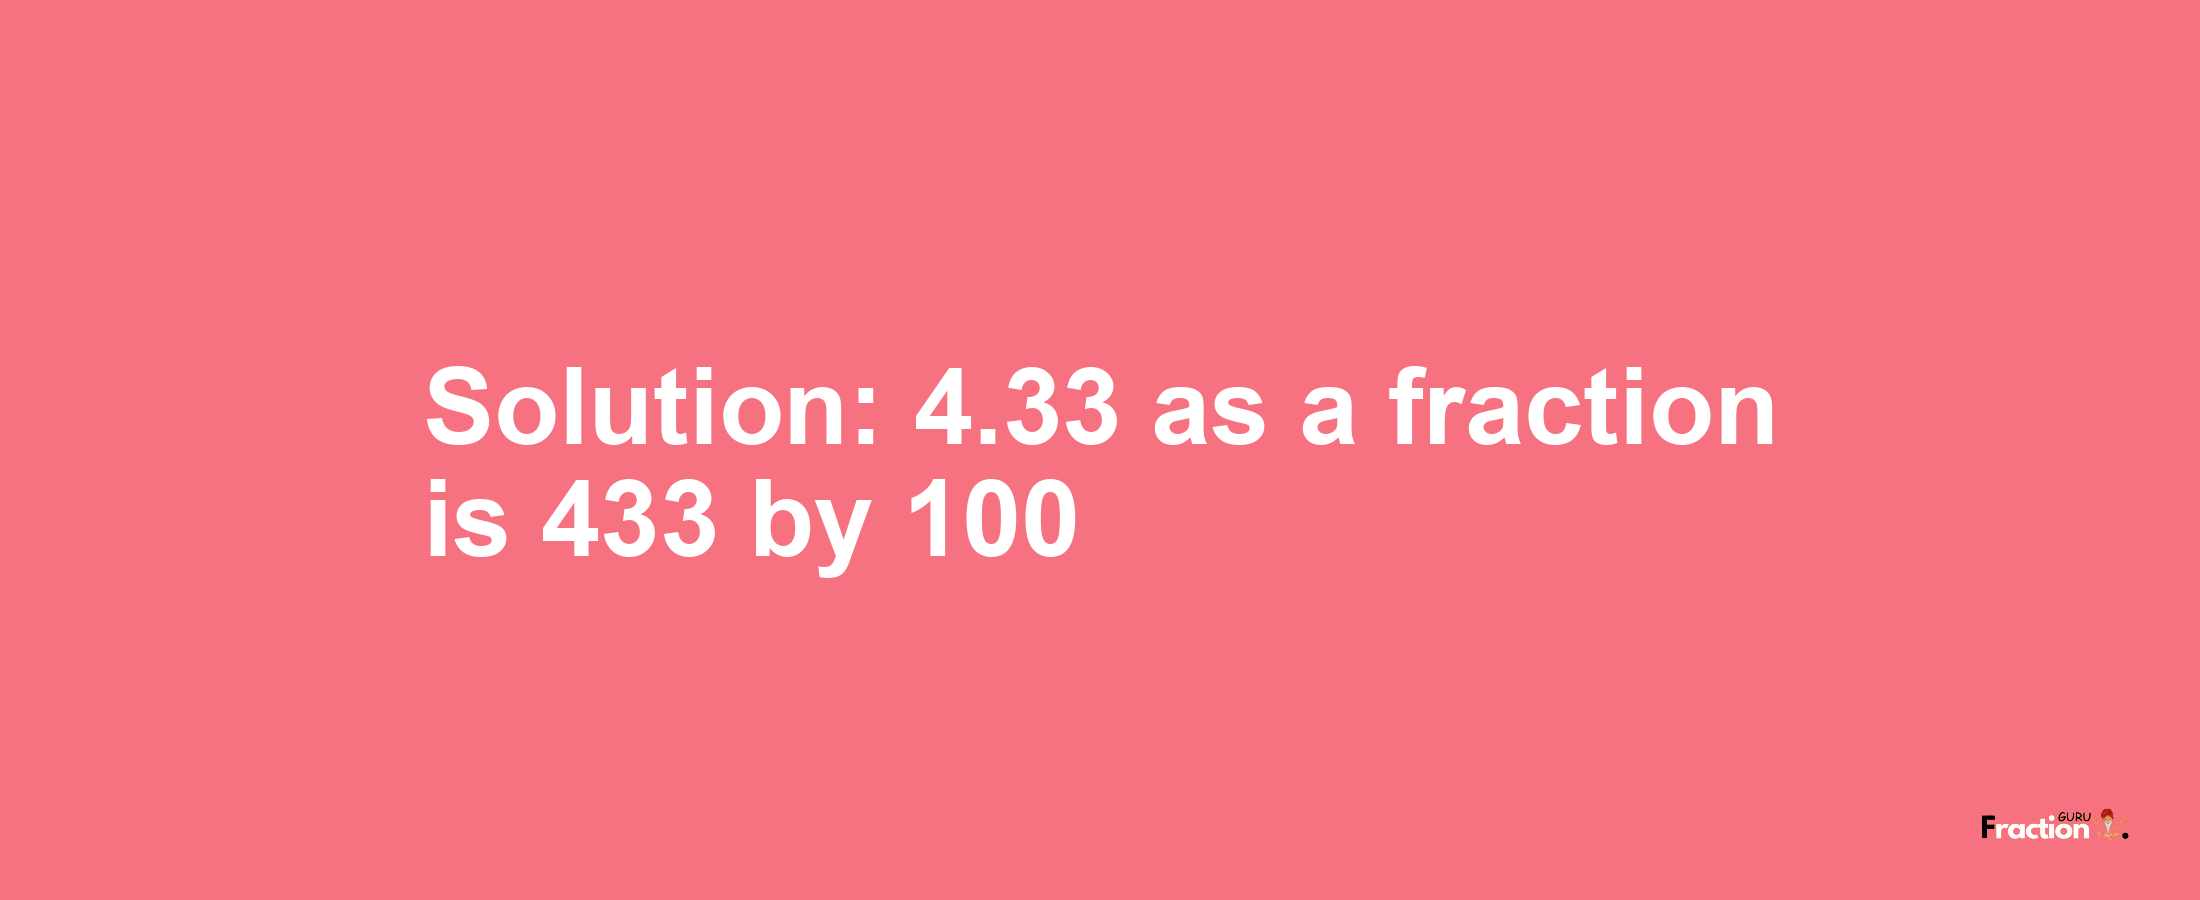 Solution:4.33 as a fraction is 433/100